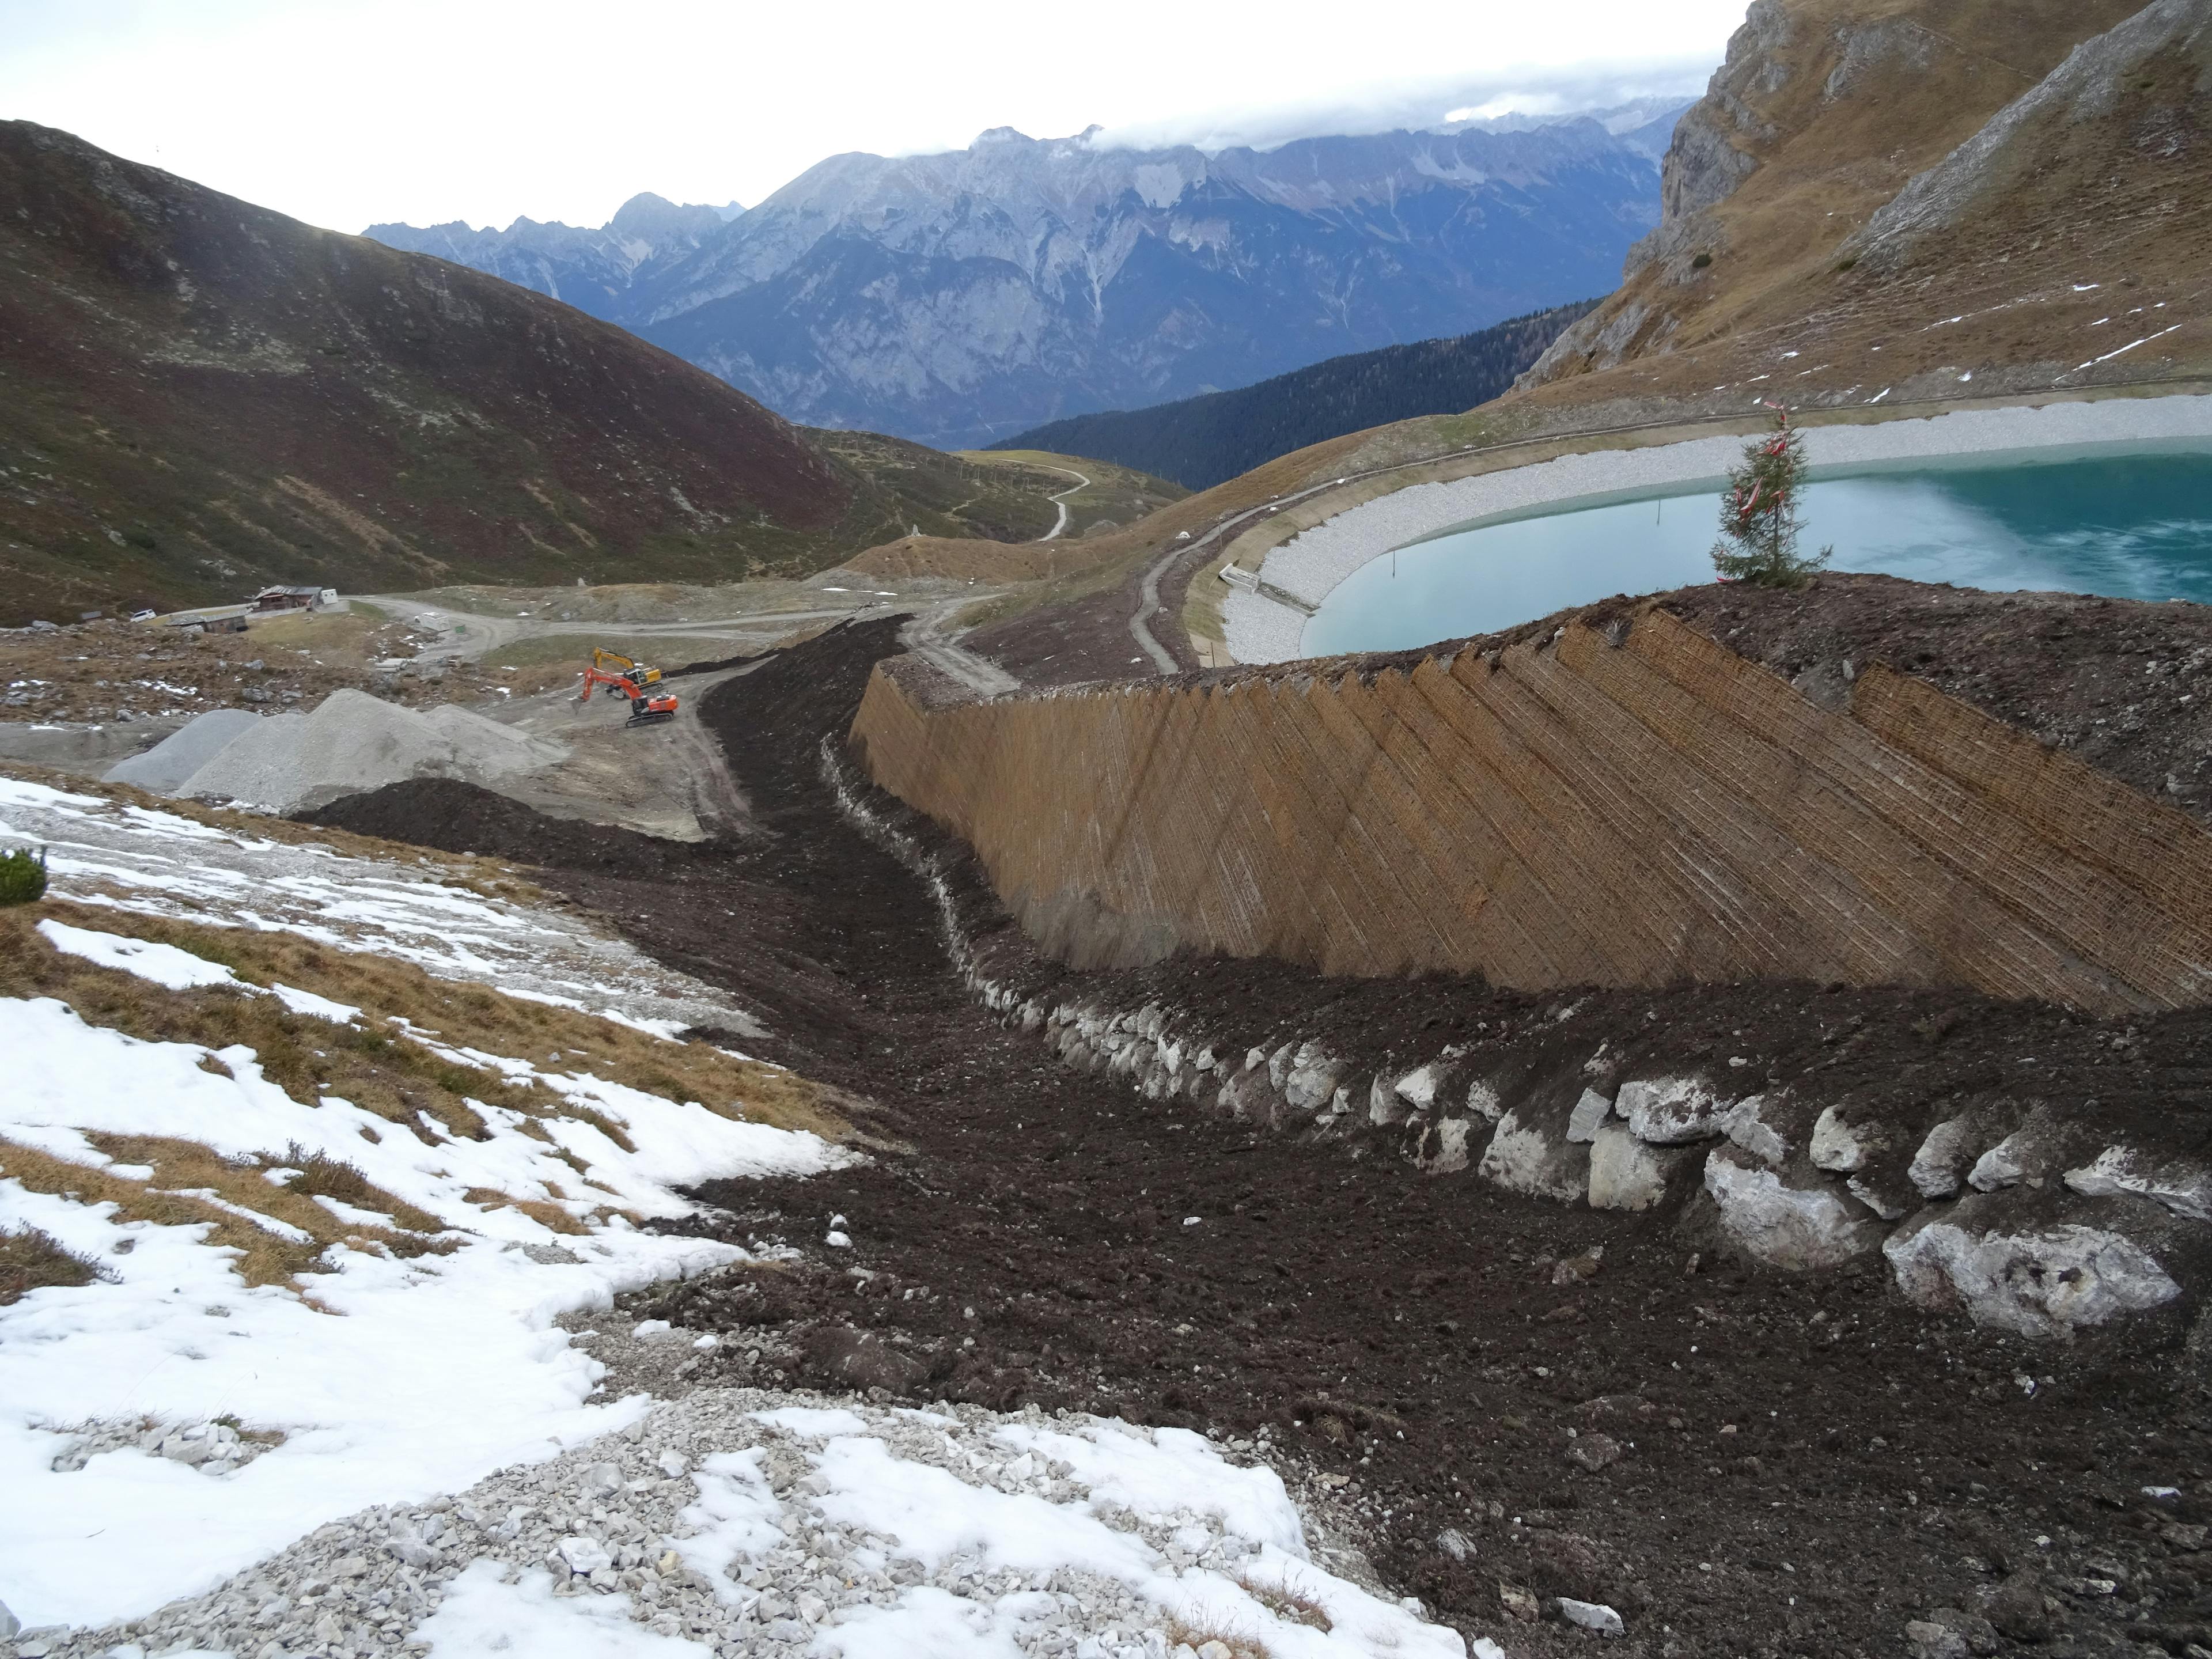 Protecting Alpine resources from avalanches with geogrids